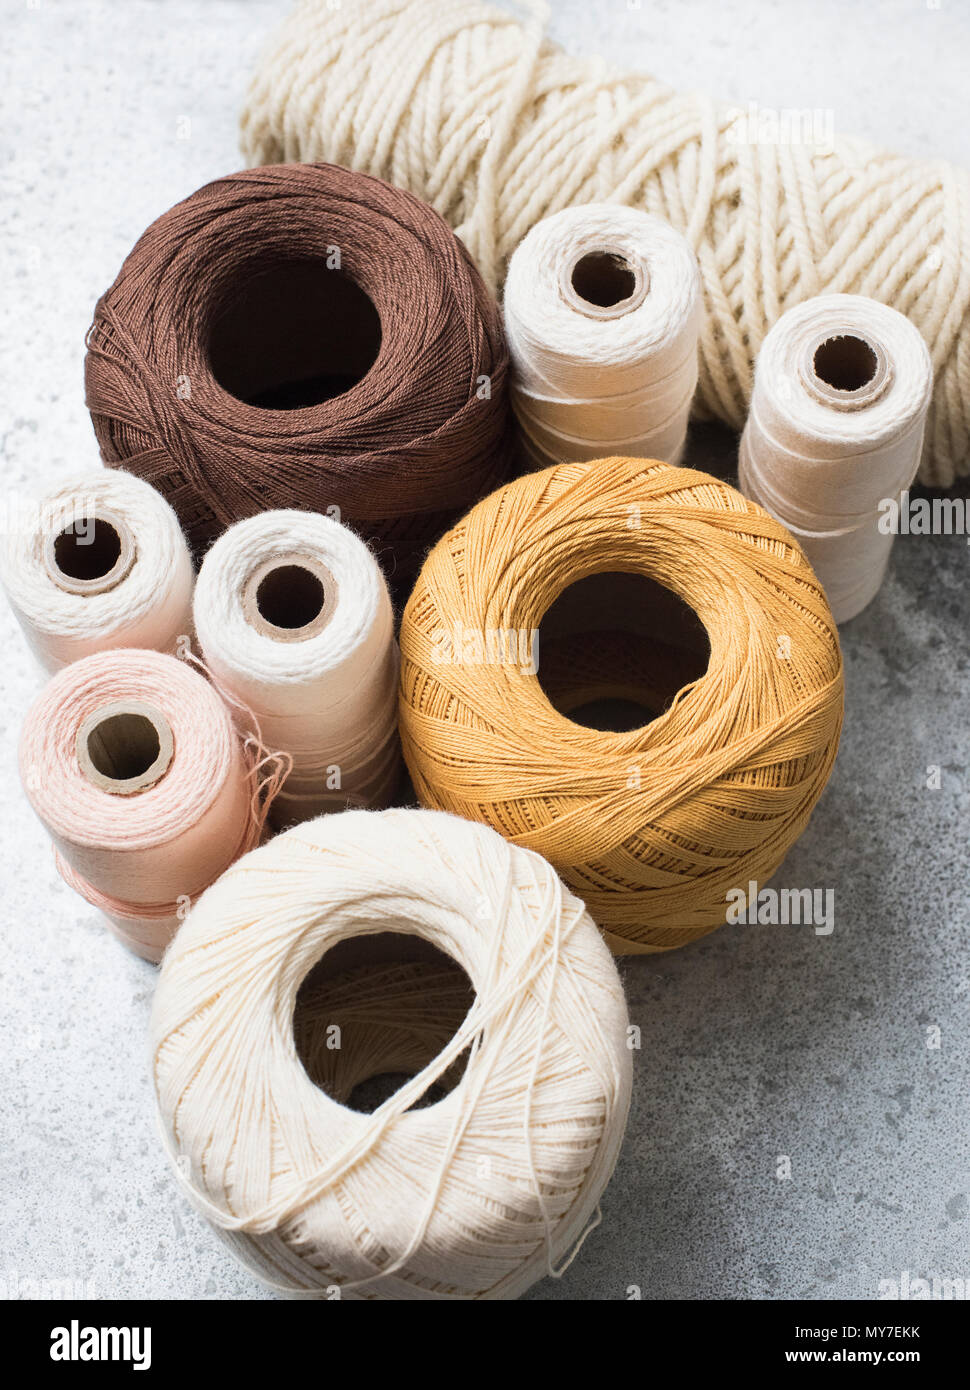 Still life with spools of yarn and string, overhead view Stock Photo